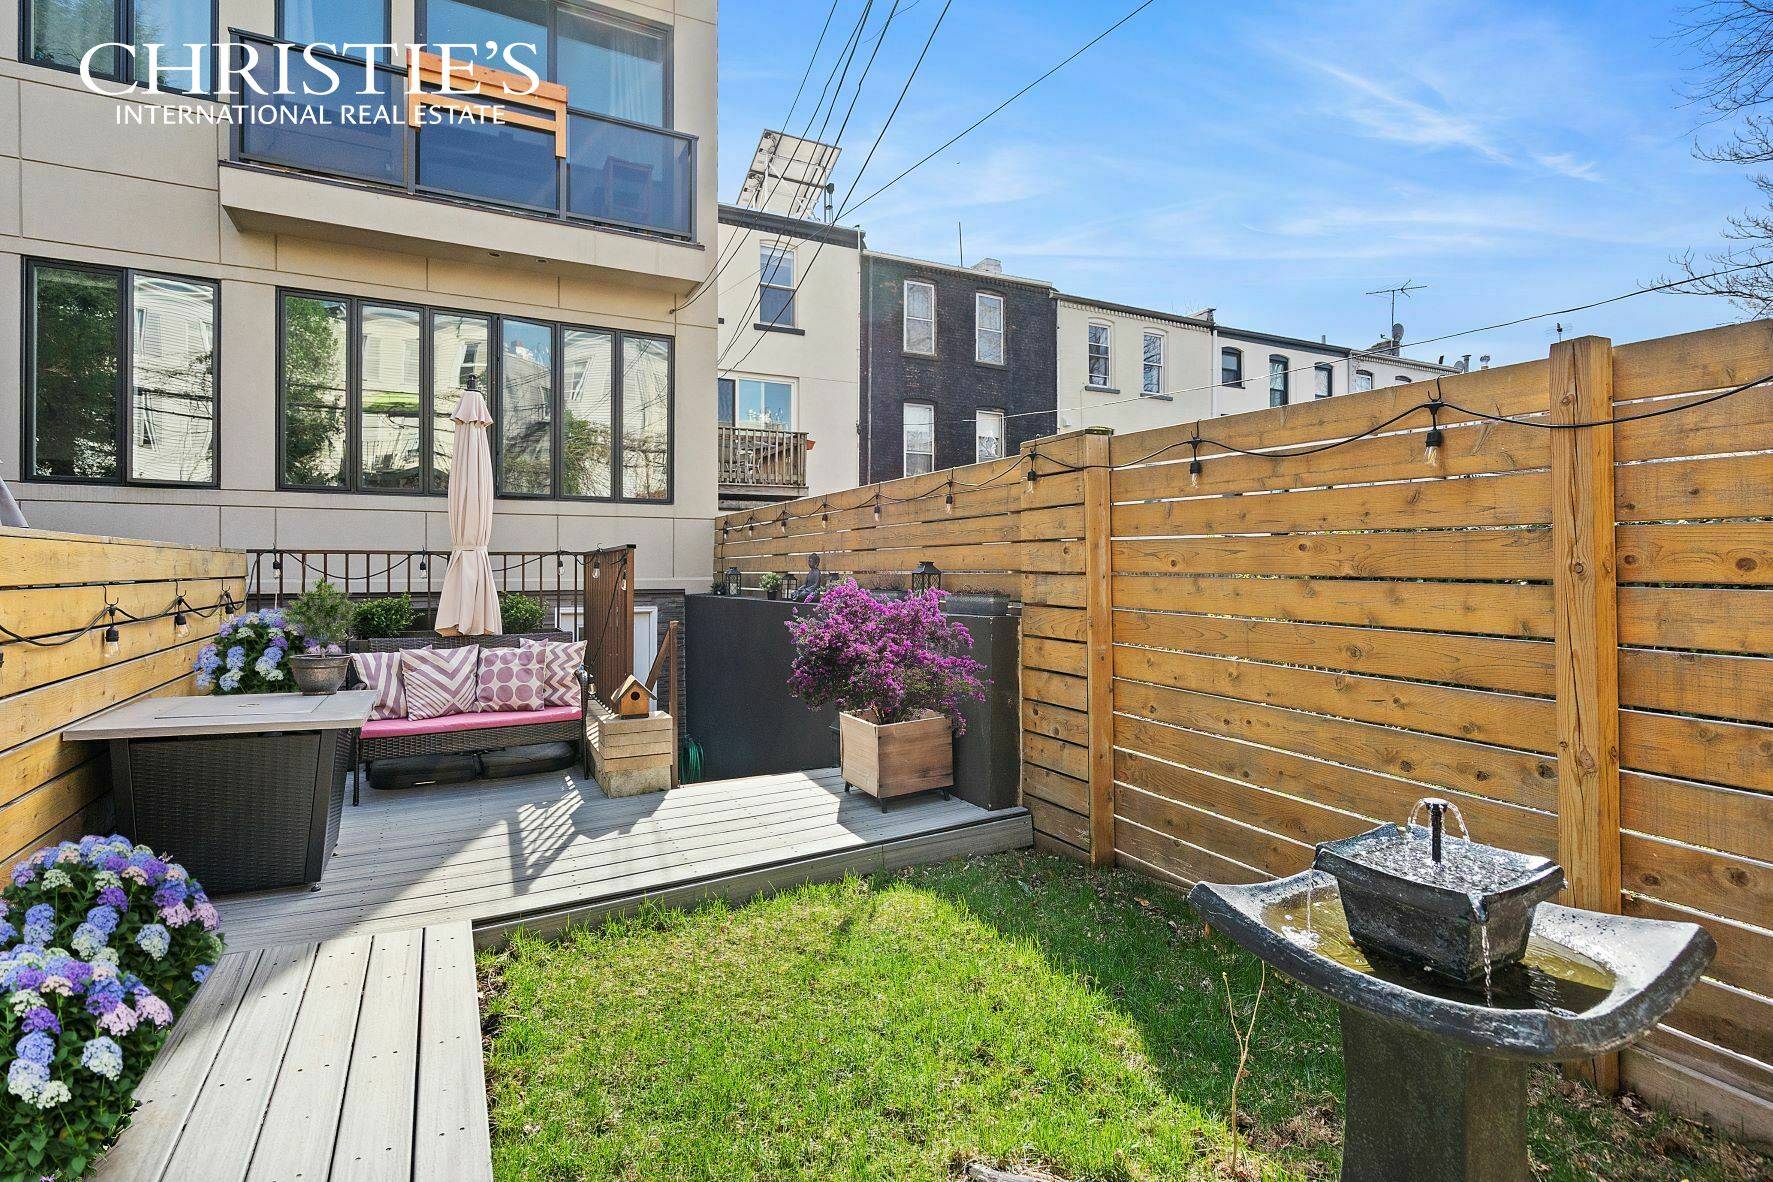 This triple mint duplex condo has its own private backyard with 2 levels, central air conditioning and a washer dryer !